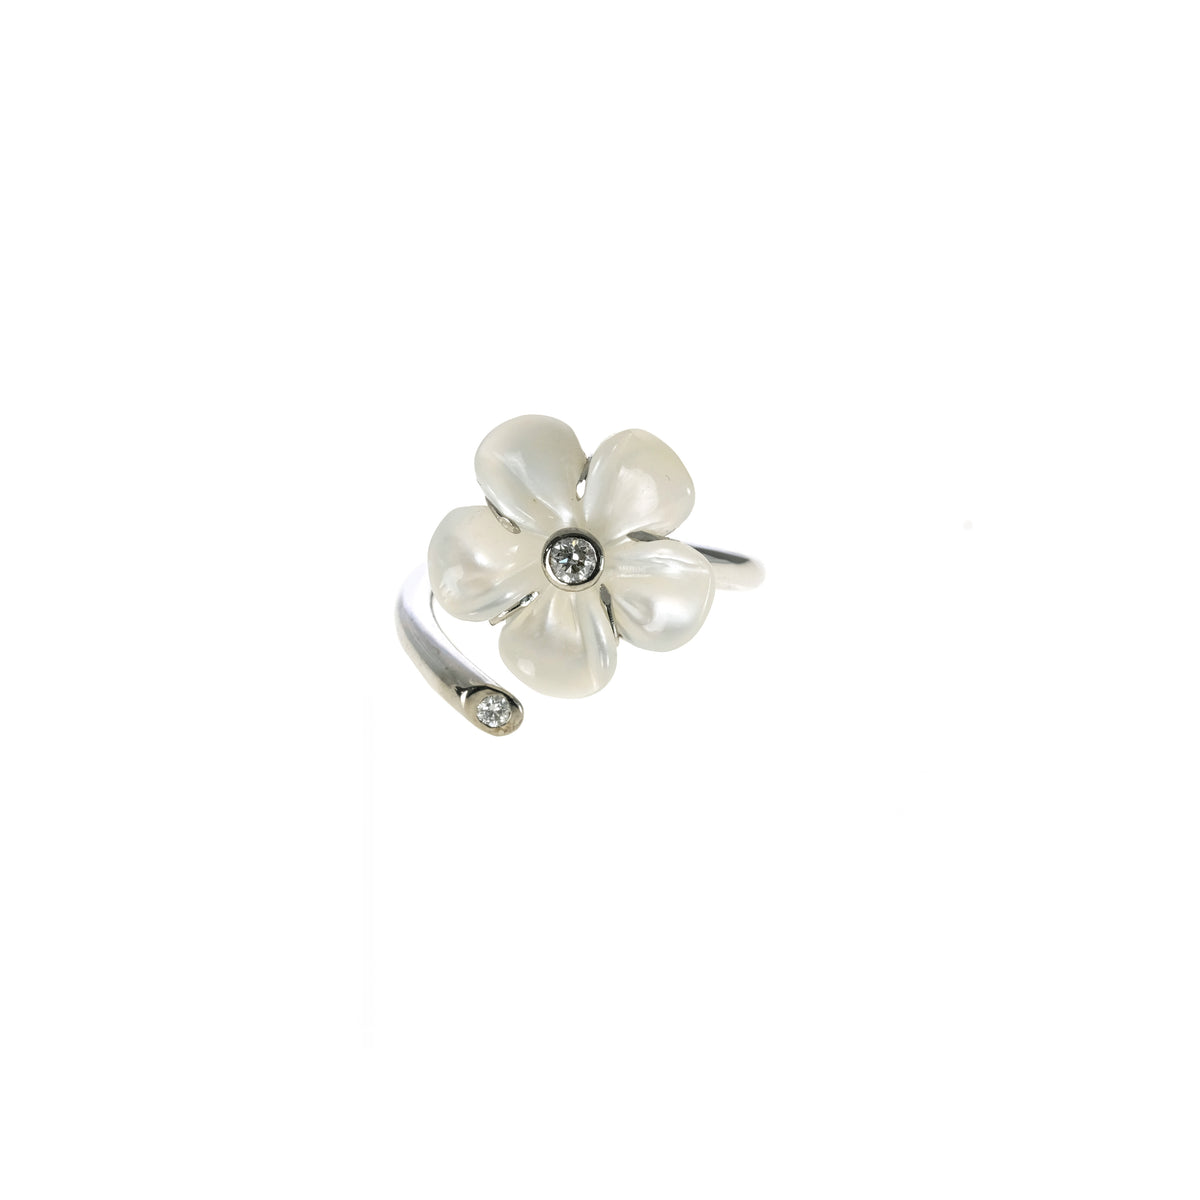 Mother of Pearl Kalachuchi Ring Gap Style, Small, with Diamond (available in yellow, white, and rose gold)